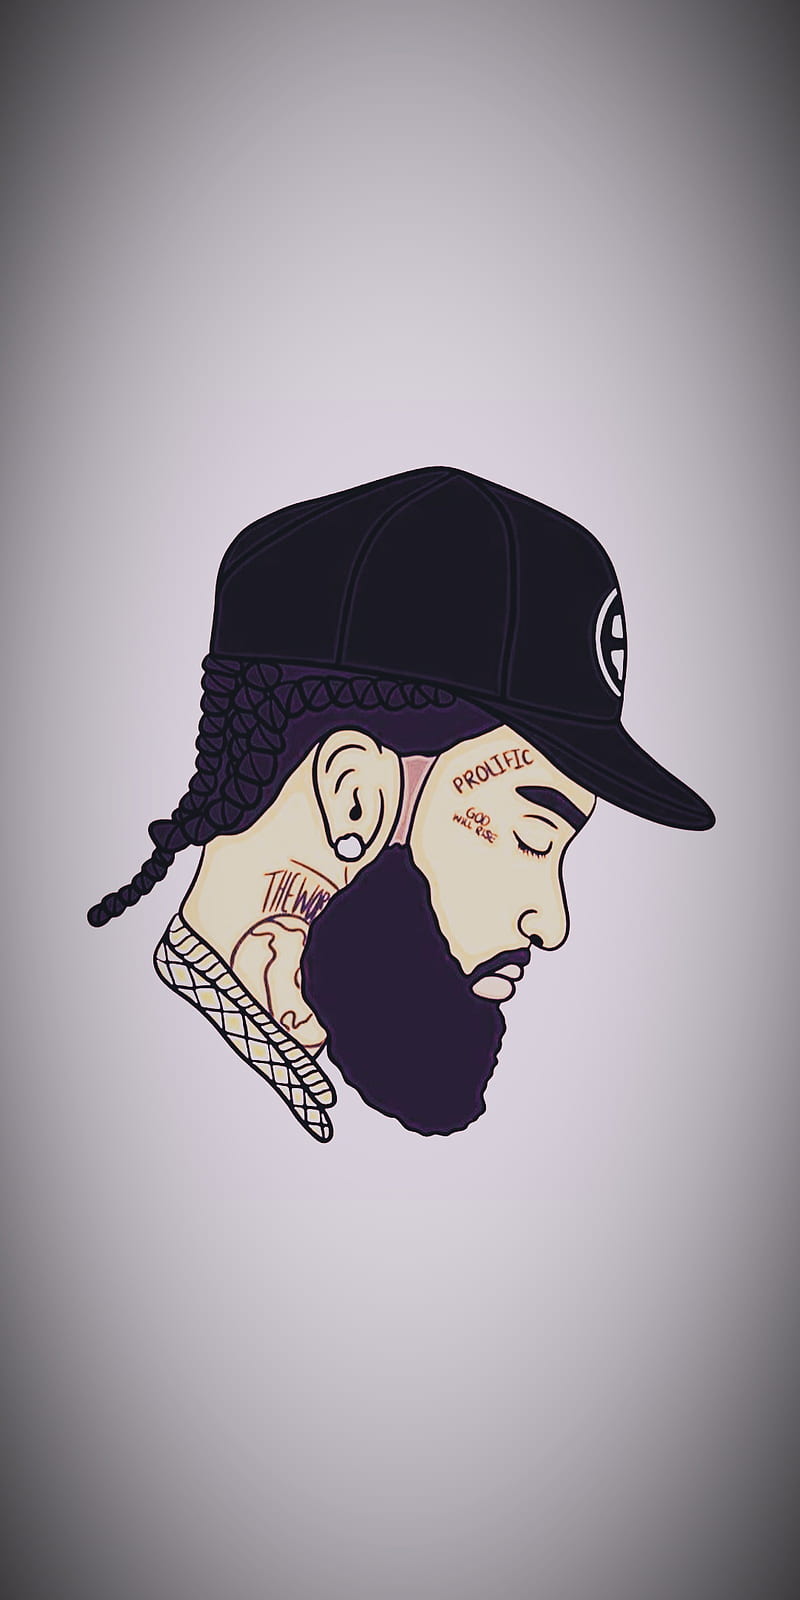 Nipsey Hussle Wallpaper for mobile phone tablet desktop computer and  other devices HD and 4K wallpapers  Hip hop artwork Hip hop wallpaper  Black love art